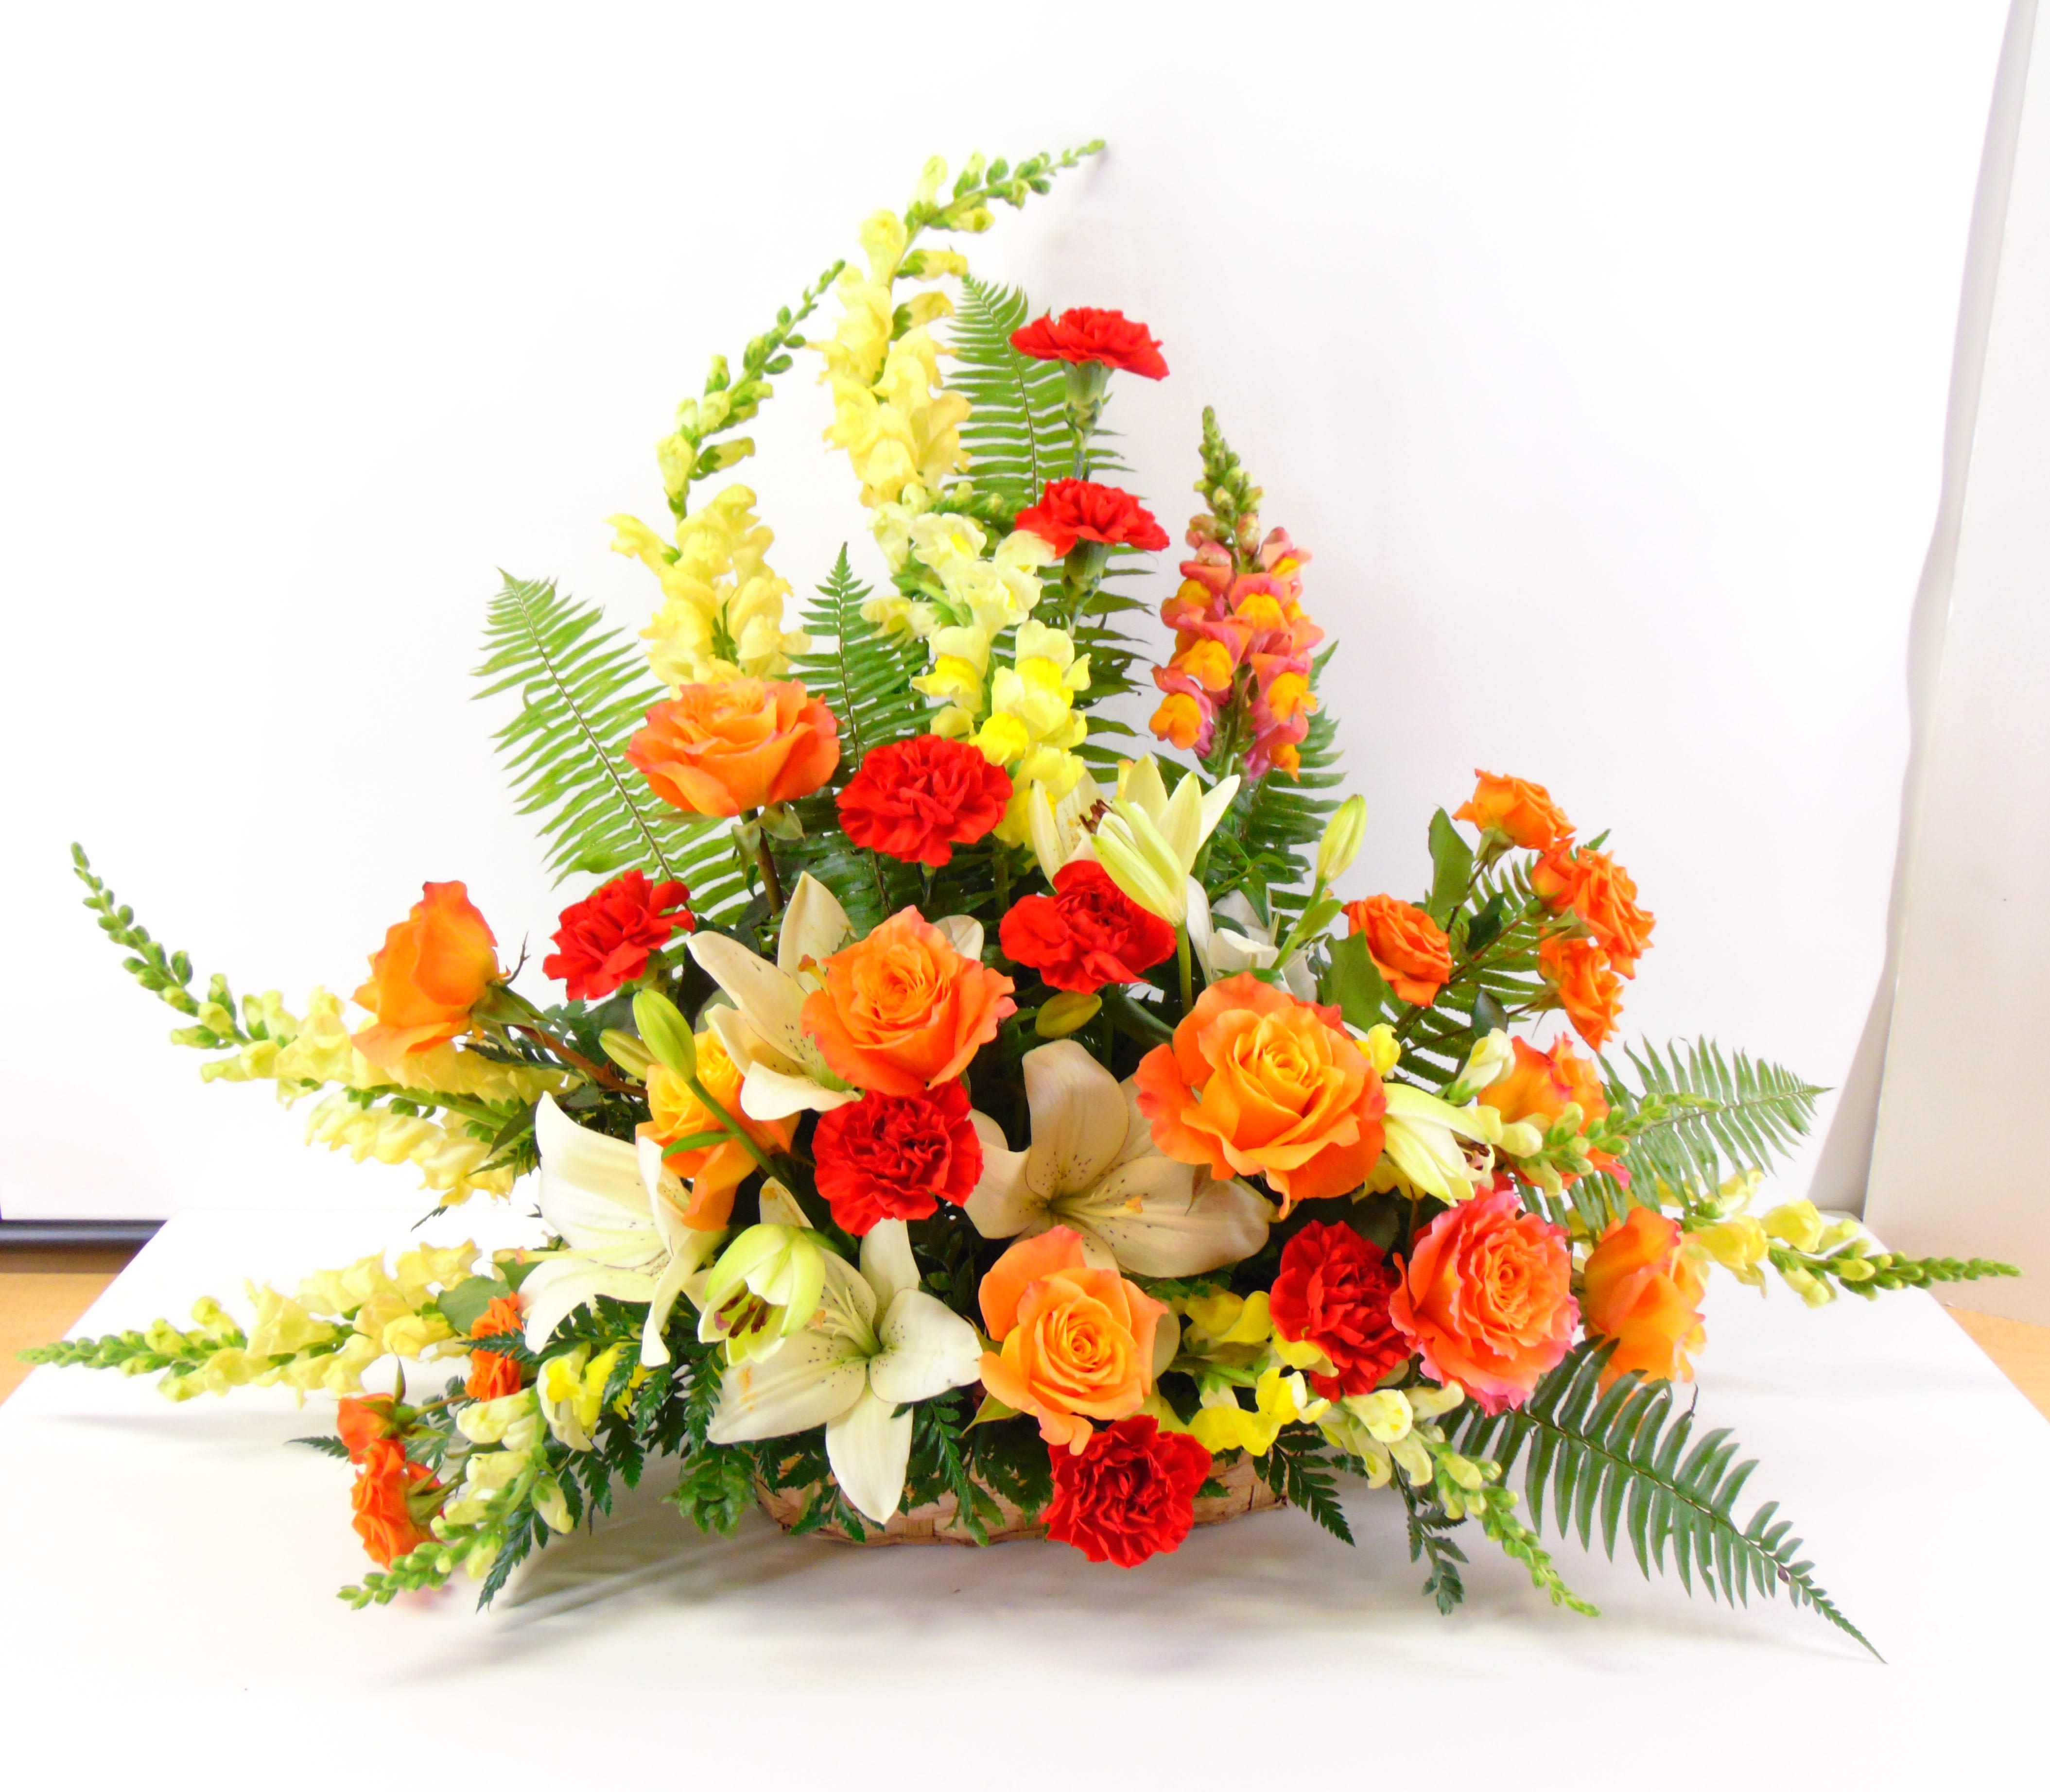 Golden Memories Arrangement - Glowing Golden snapdragons, roses and red carnations symbolize the golden memories shared. The deluxe option is pictured.